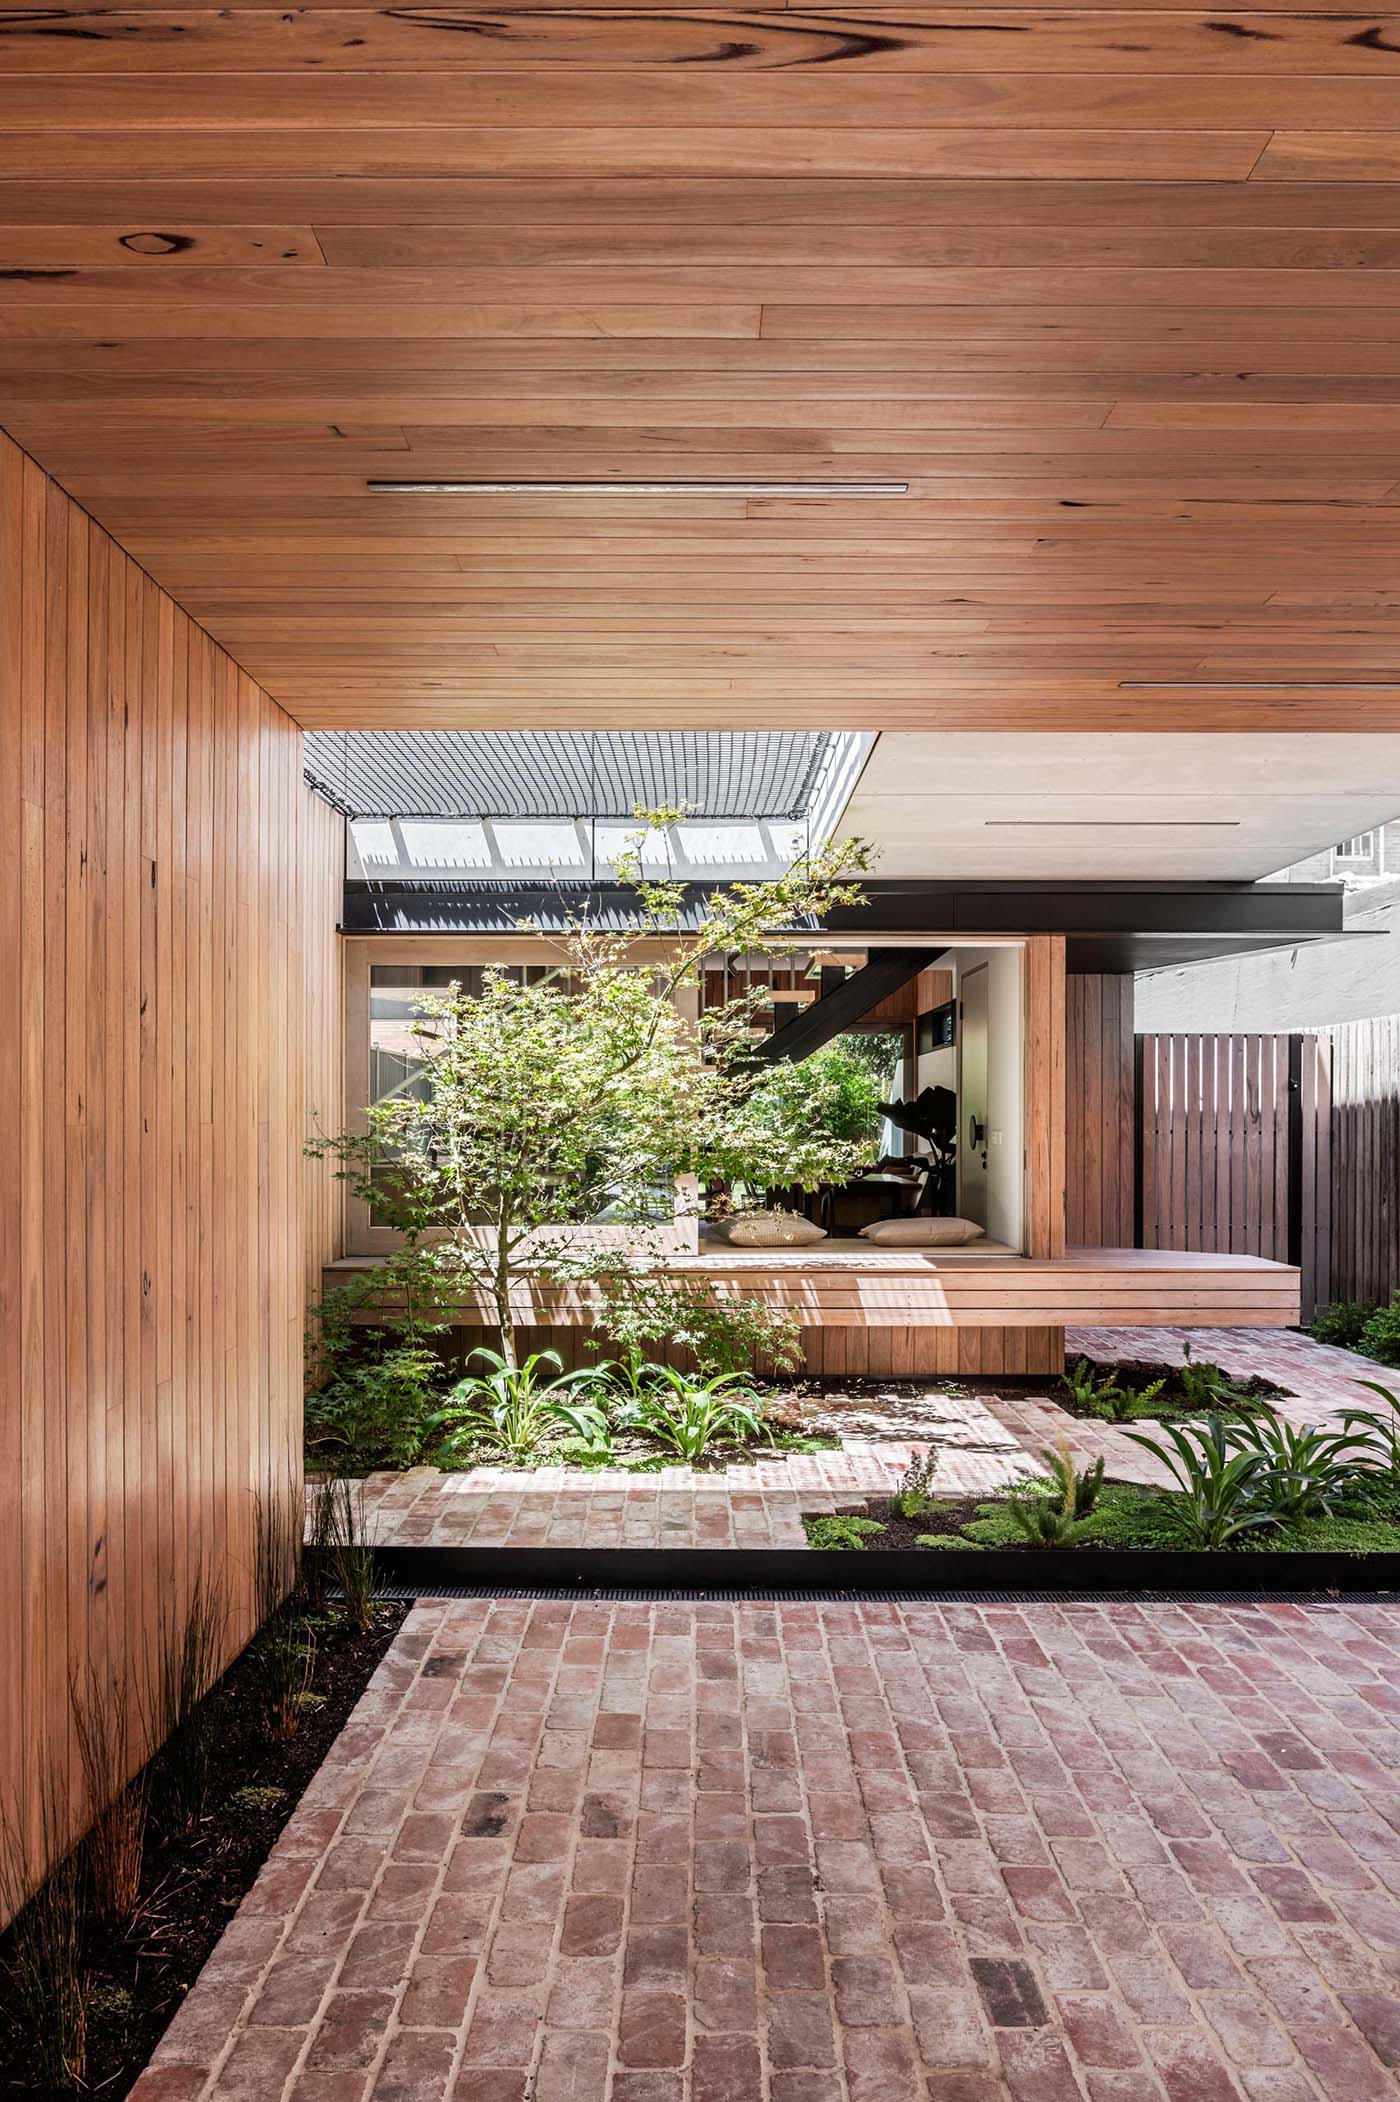 Connecting the interior spaces with the carport of this modern home, is a small courtyard with bricks surrounding small pockets of greenery. In the open space above, there's a net for relaxing in the sun.